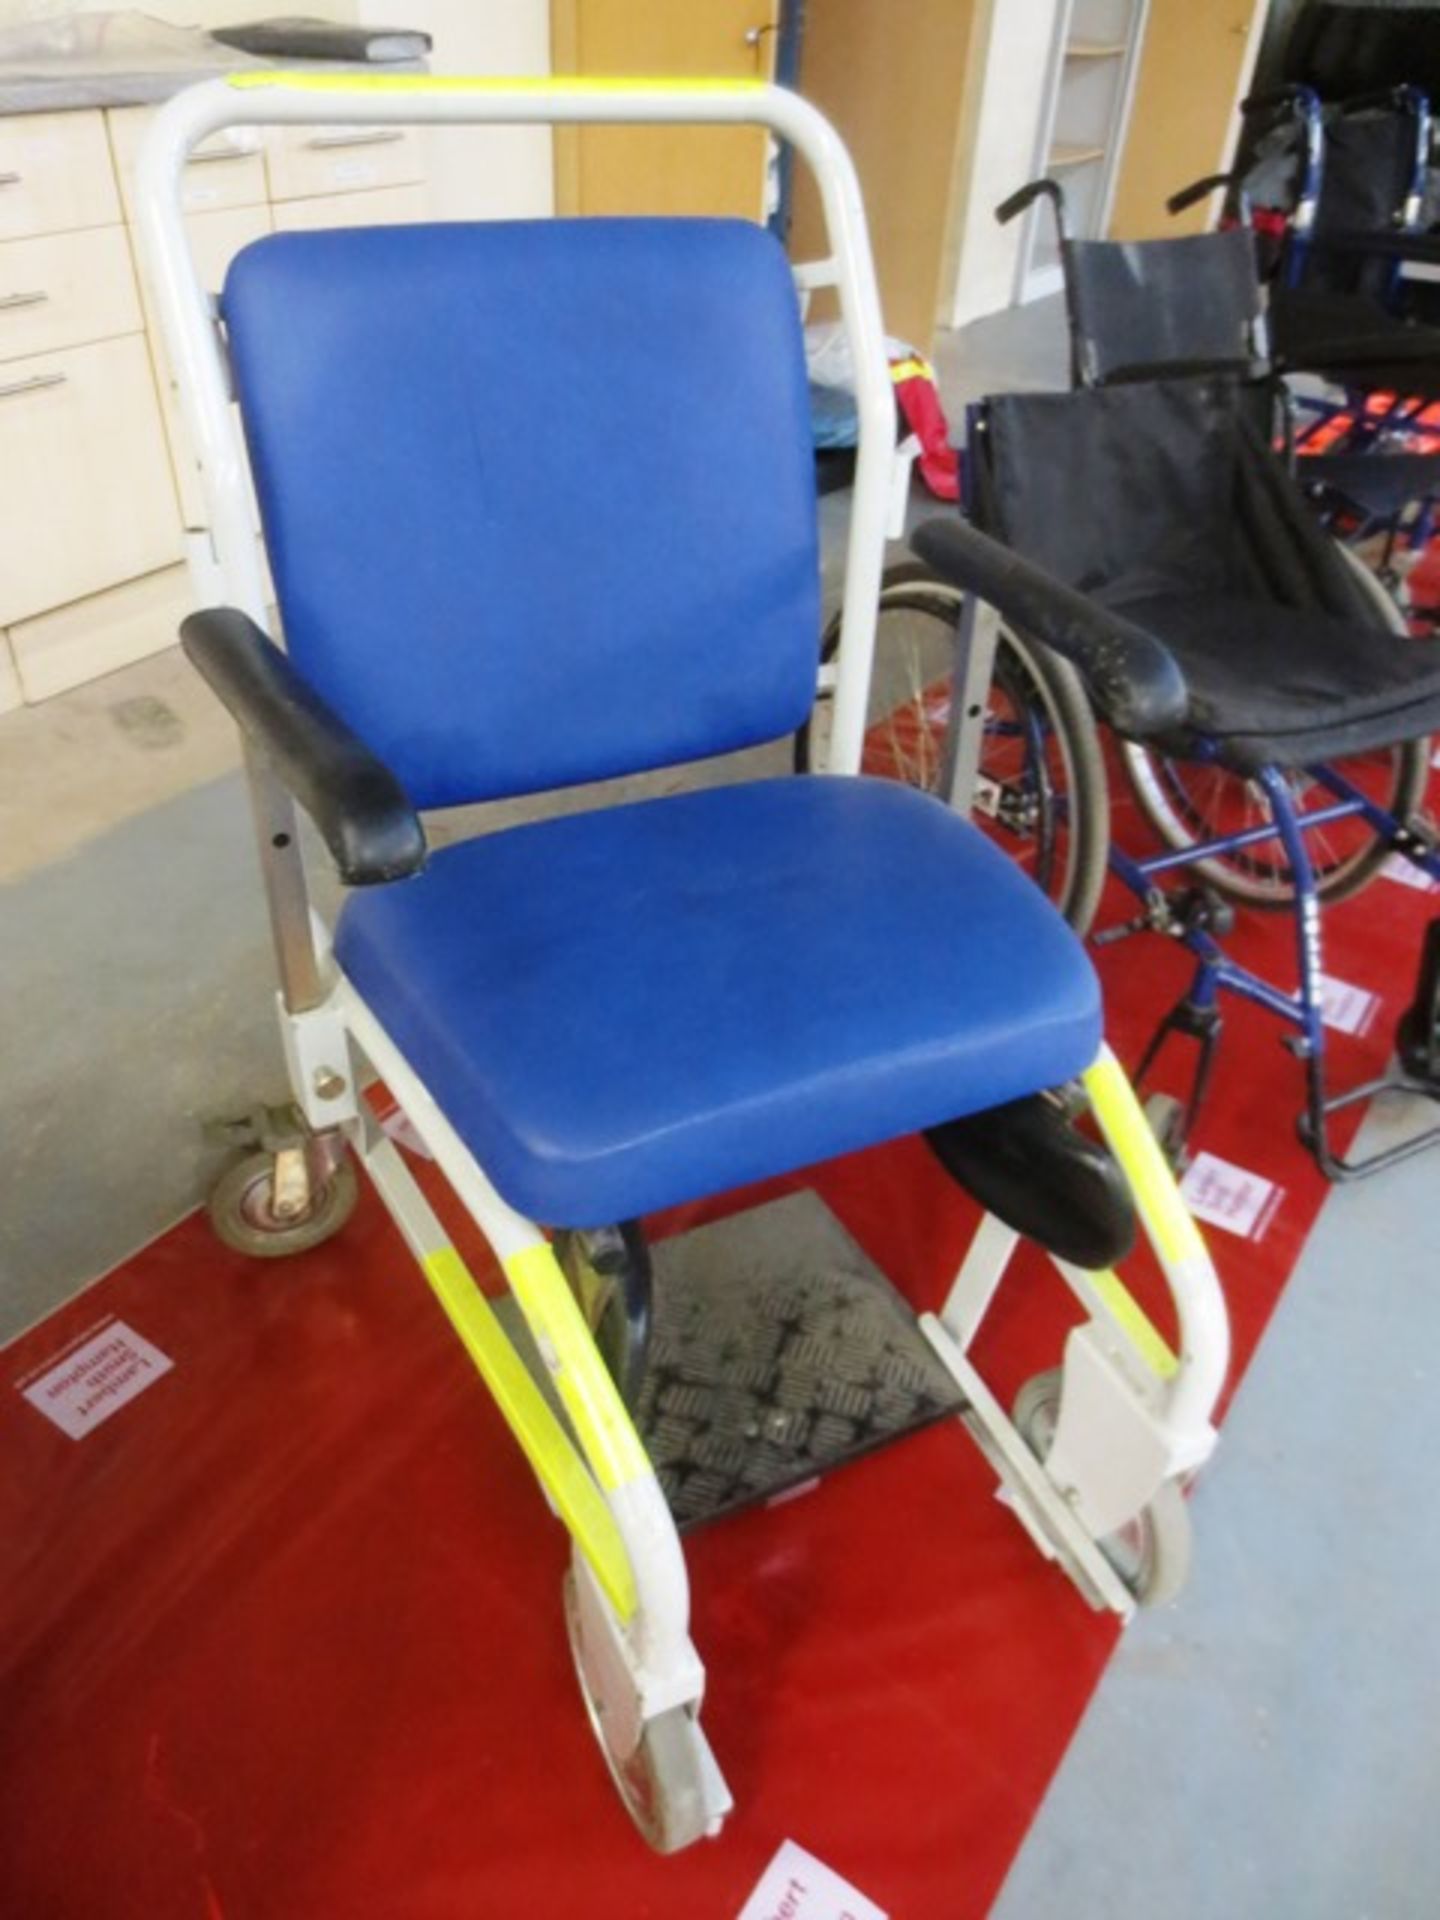 Unbadged wheelchair with leg supports